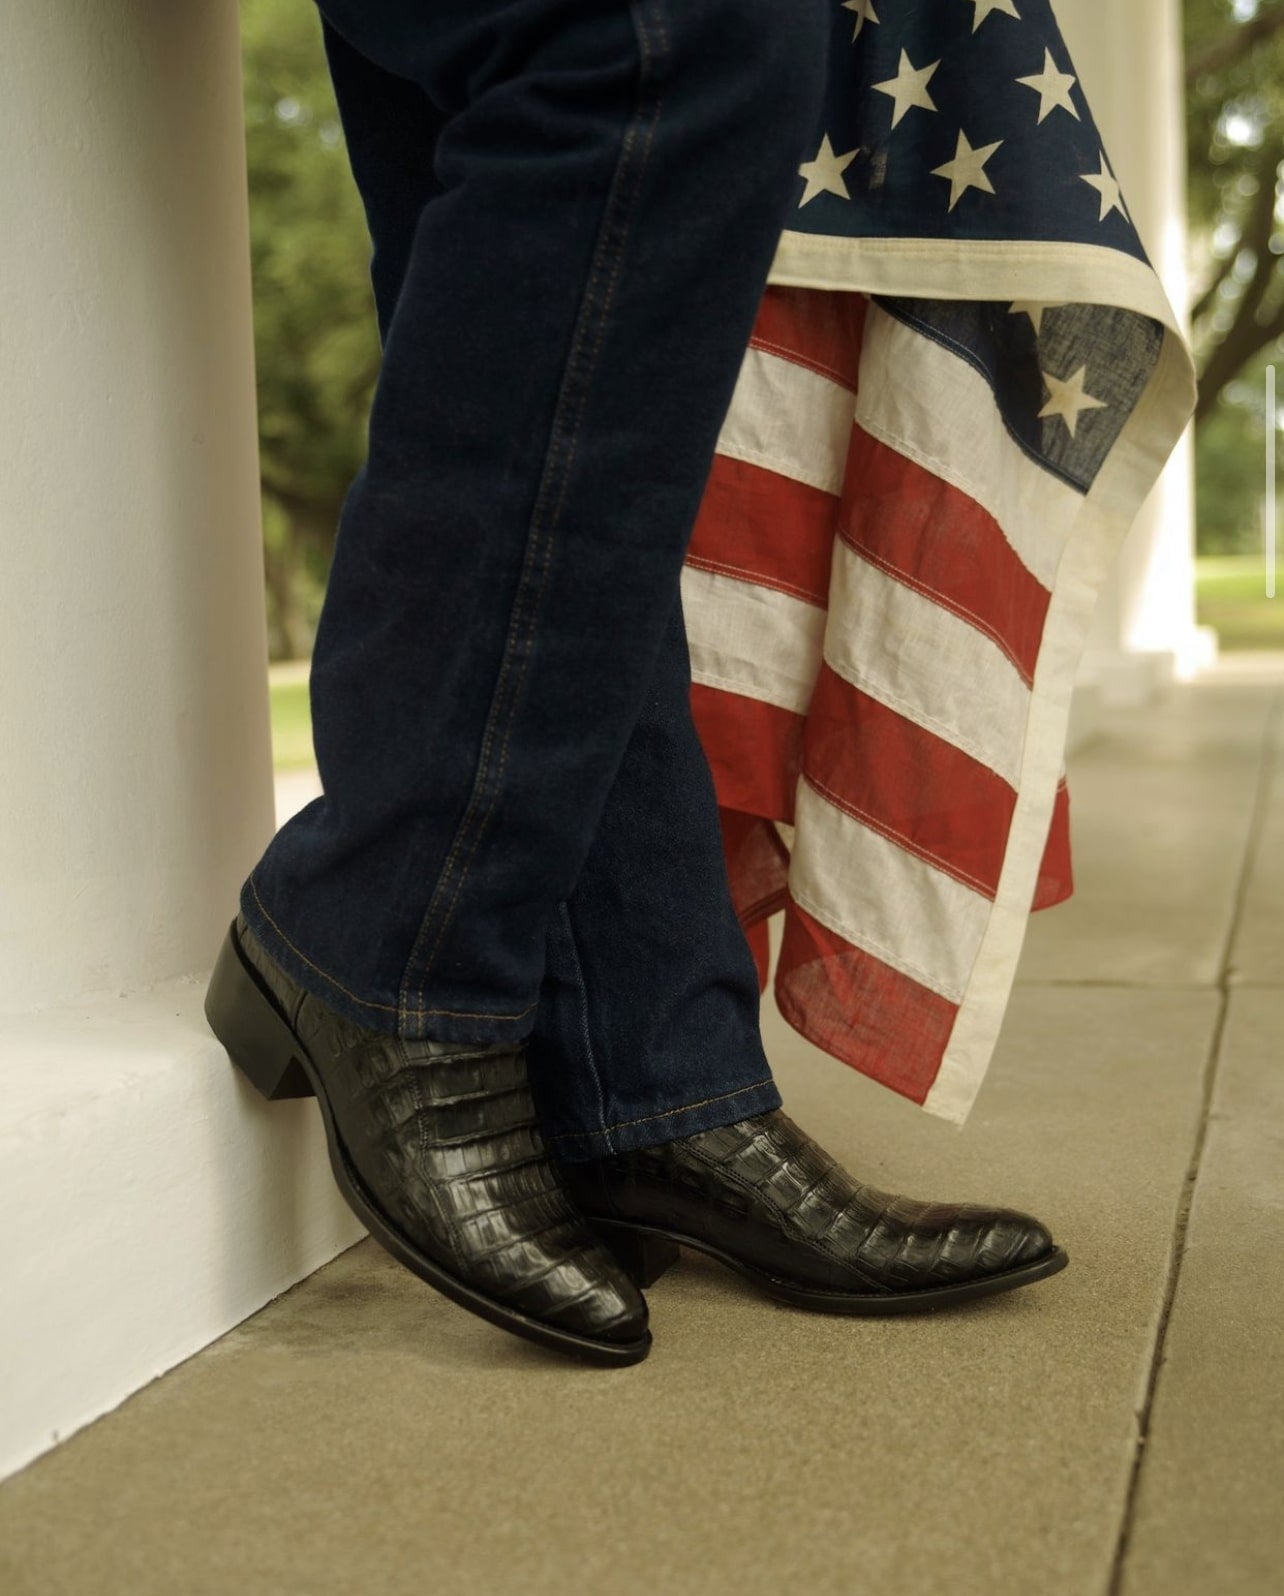 Caiman cowboy boots next to American flag